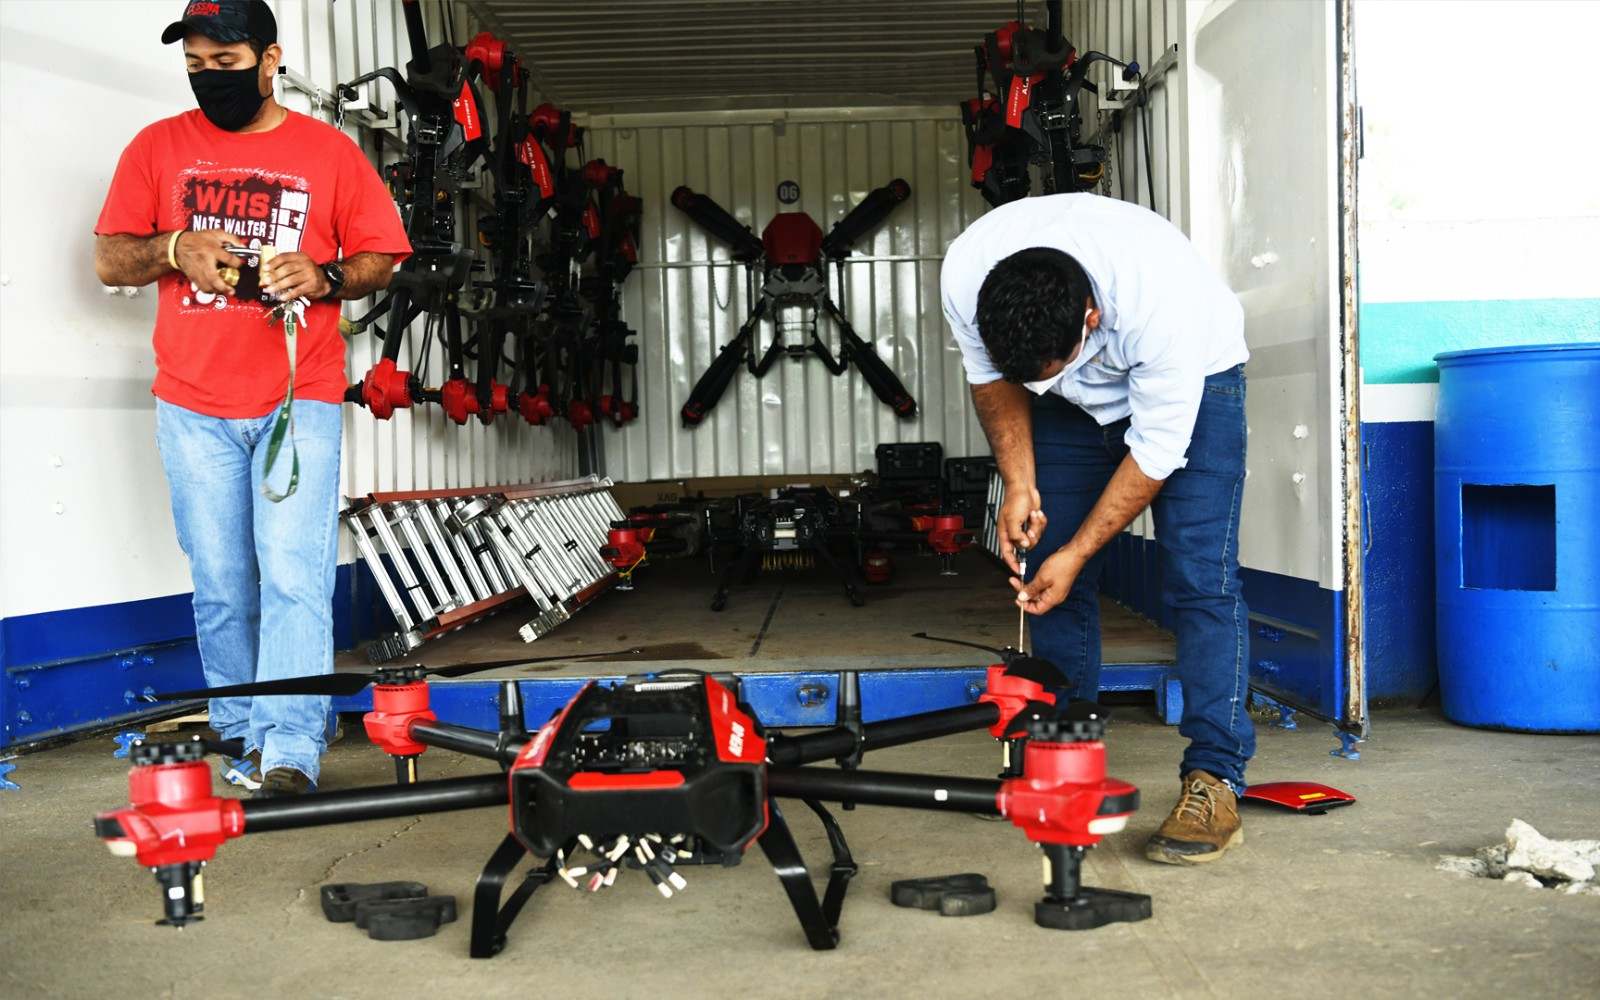 One done, more to go. It is always necessary to check the drones’ propellers before and after operations. (Ecuador, source: Megadrone S.A.)